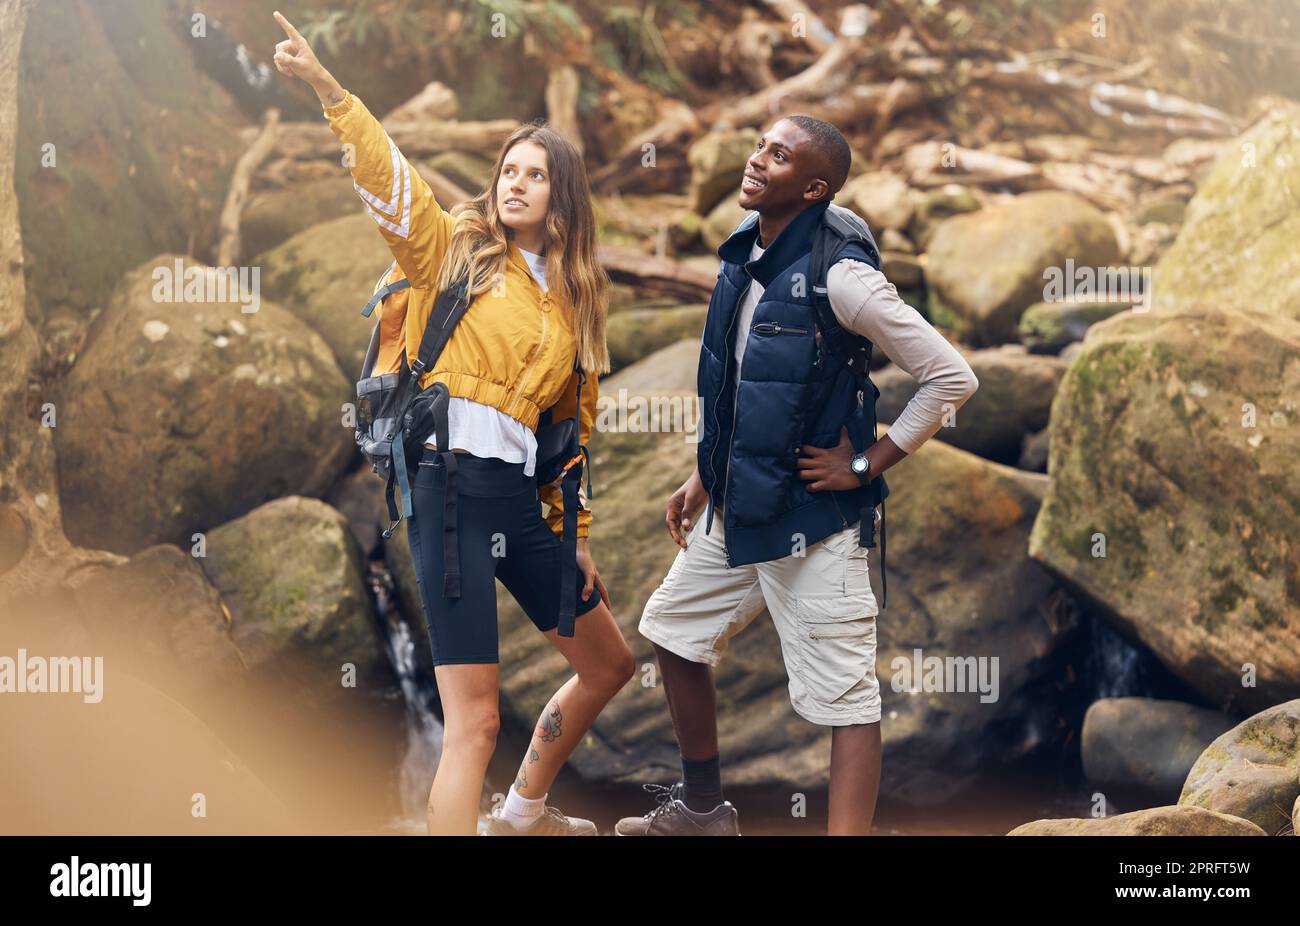 Fitness hiking, nature and couple in exercise workout together looking at paths to take on a rocky trail in the outdoors. Interracial man and woman pointing for motivation and navigation during hike. Stock Photo